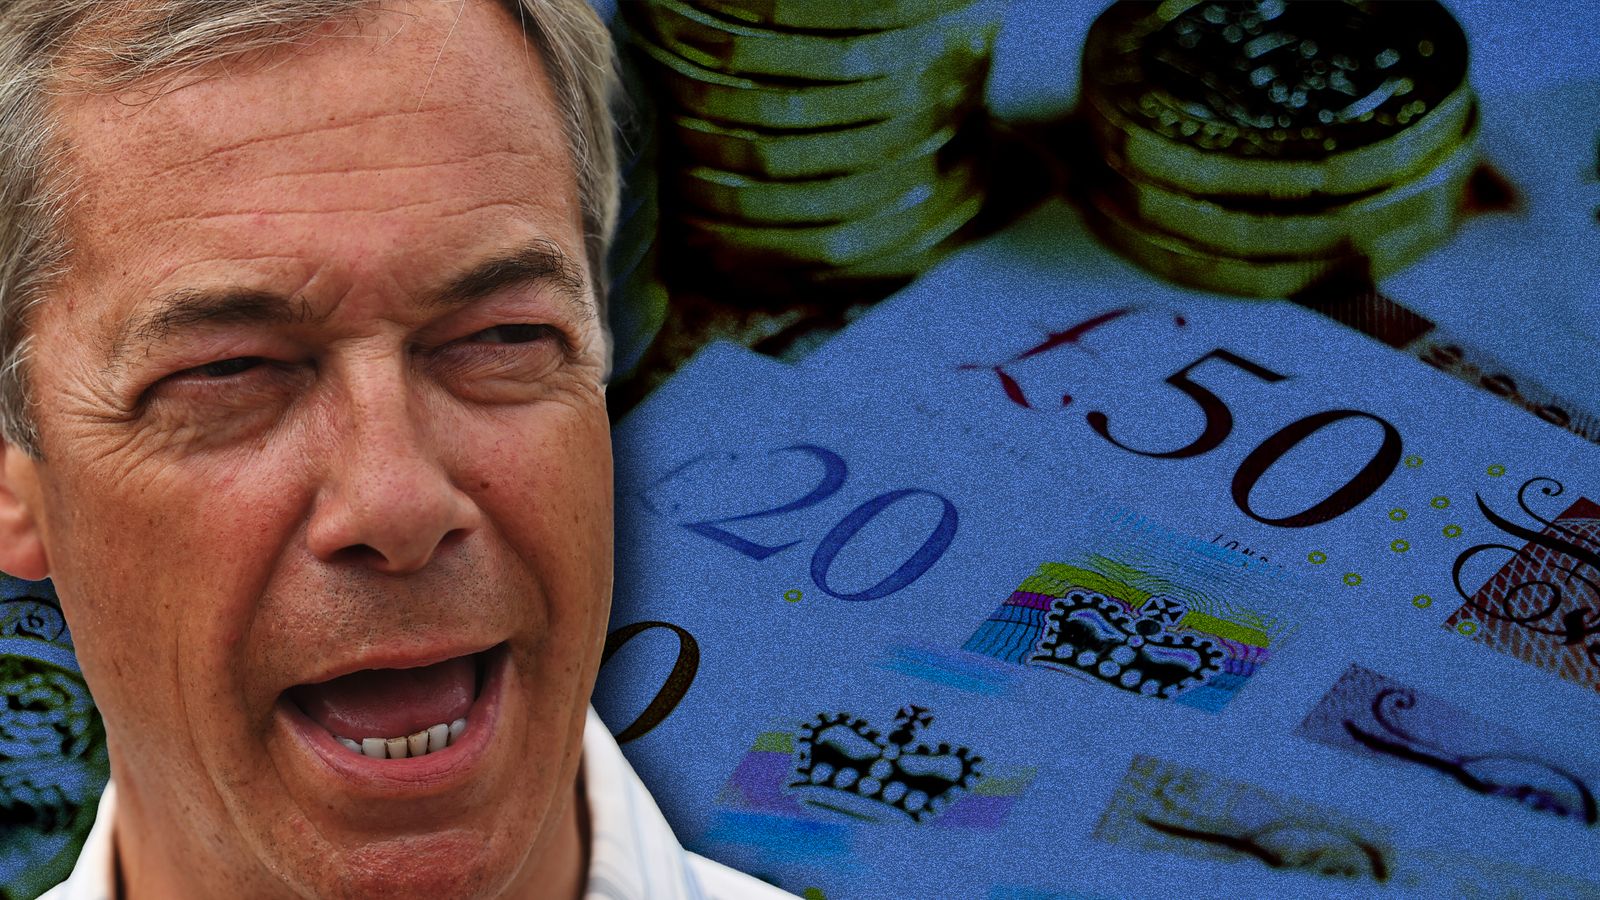 Nigel Farage's bank accounts: What's it all about, and what's the Coutts threshold?